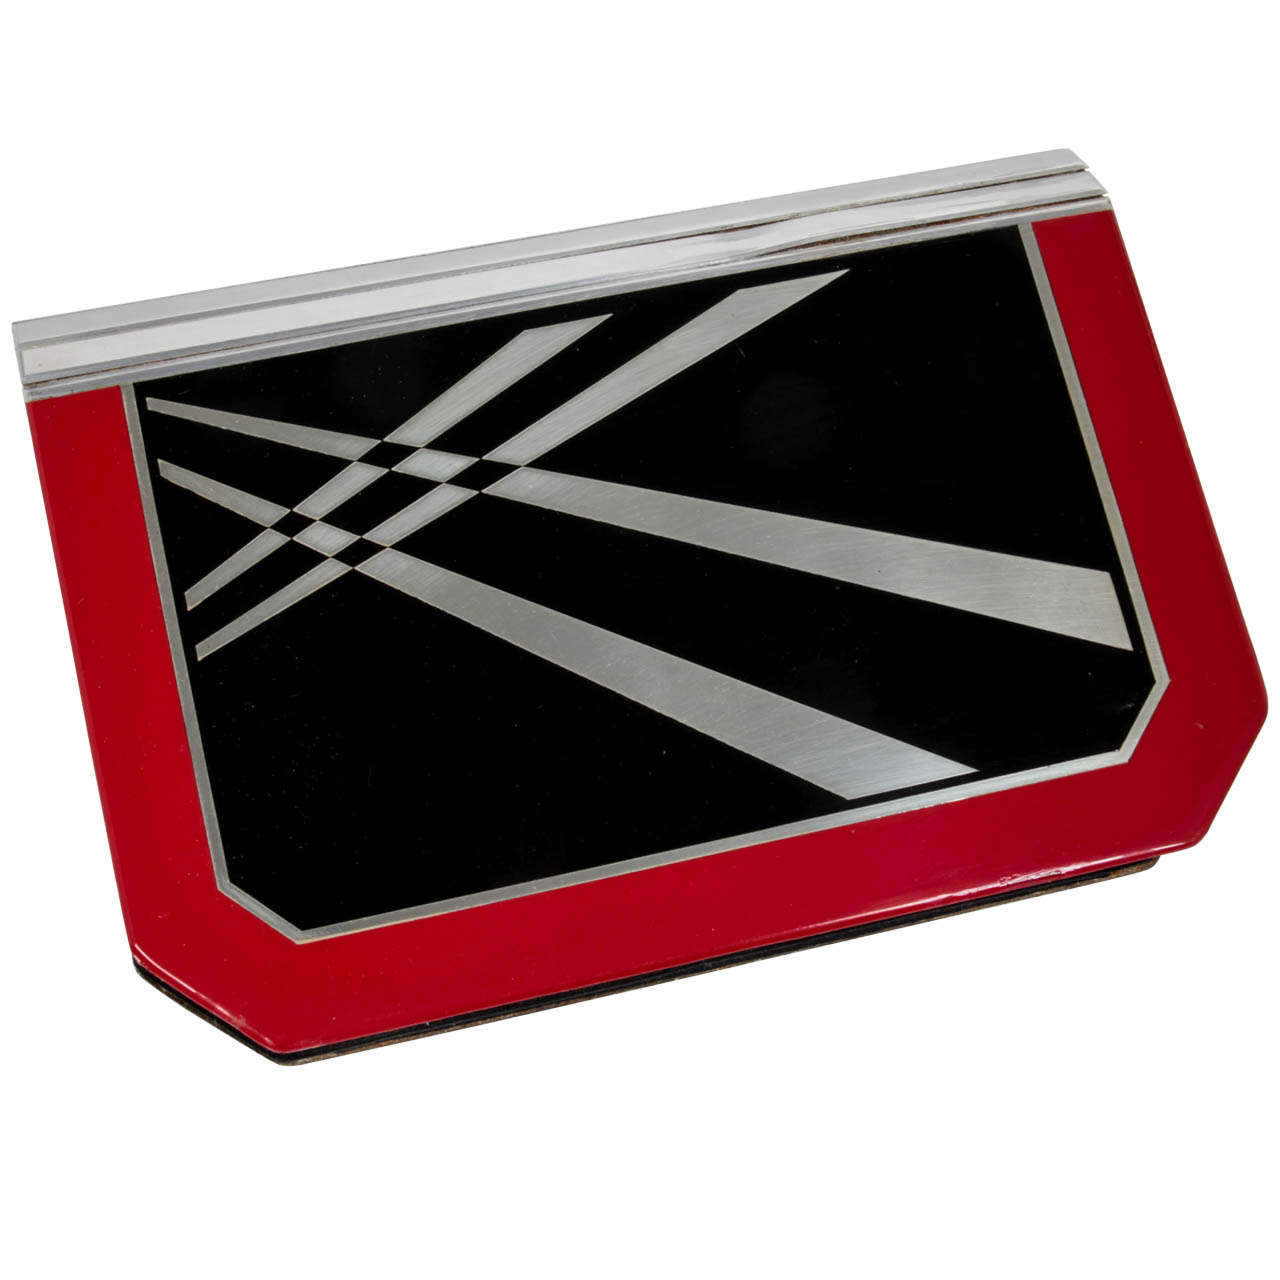 French Art Deco Dynamic Lacquered Aluminum Black Silk Satin Clutch/Purse c. 1930 For Sale